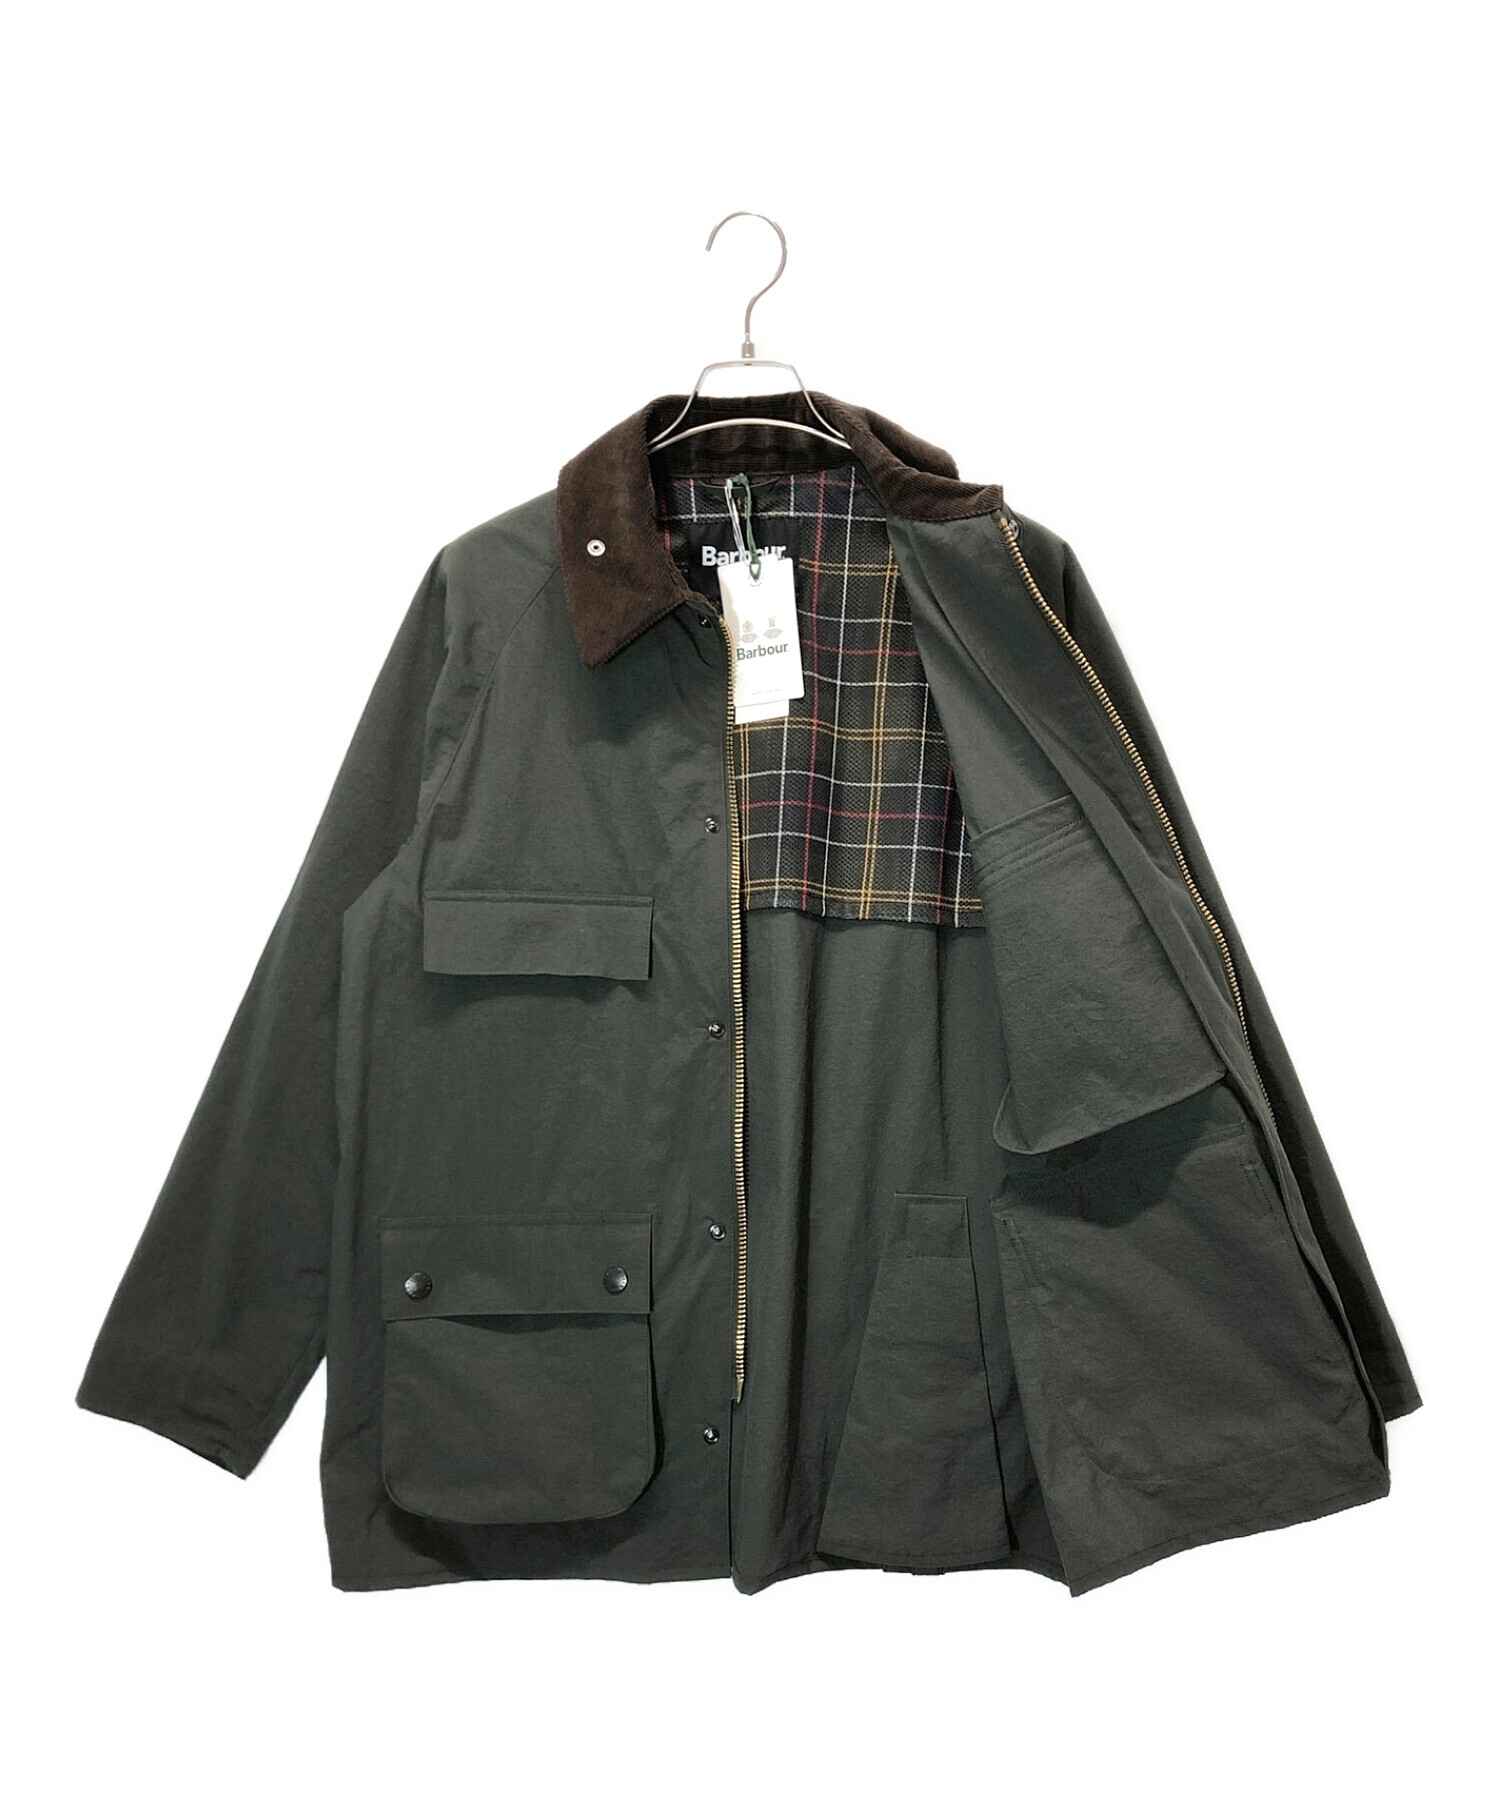 Barbour (バブアー) 別注 OLD BEDALE グリーン サイズ:40 未使用品